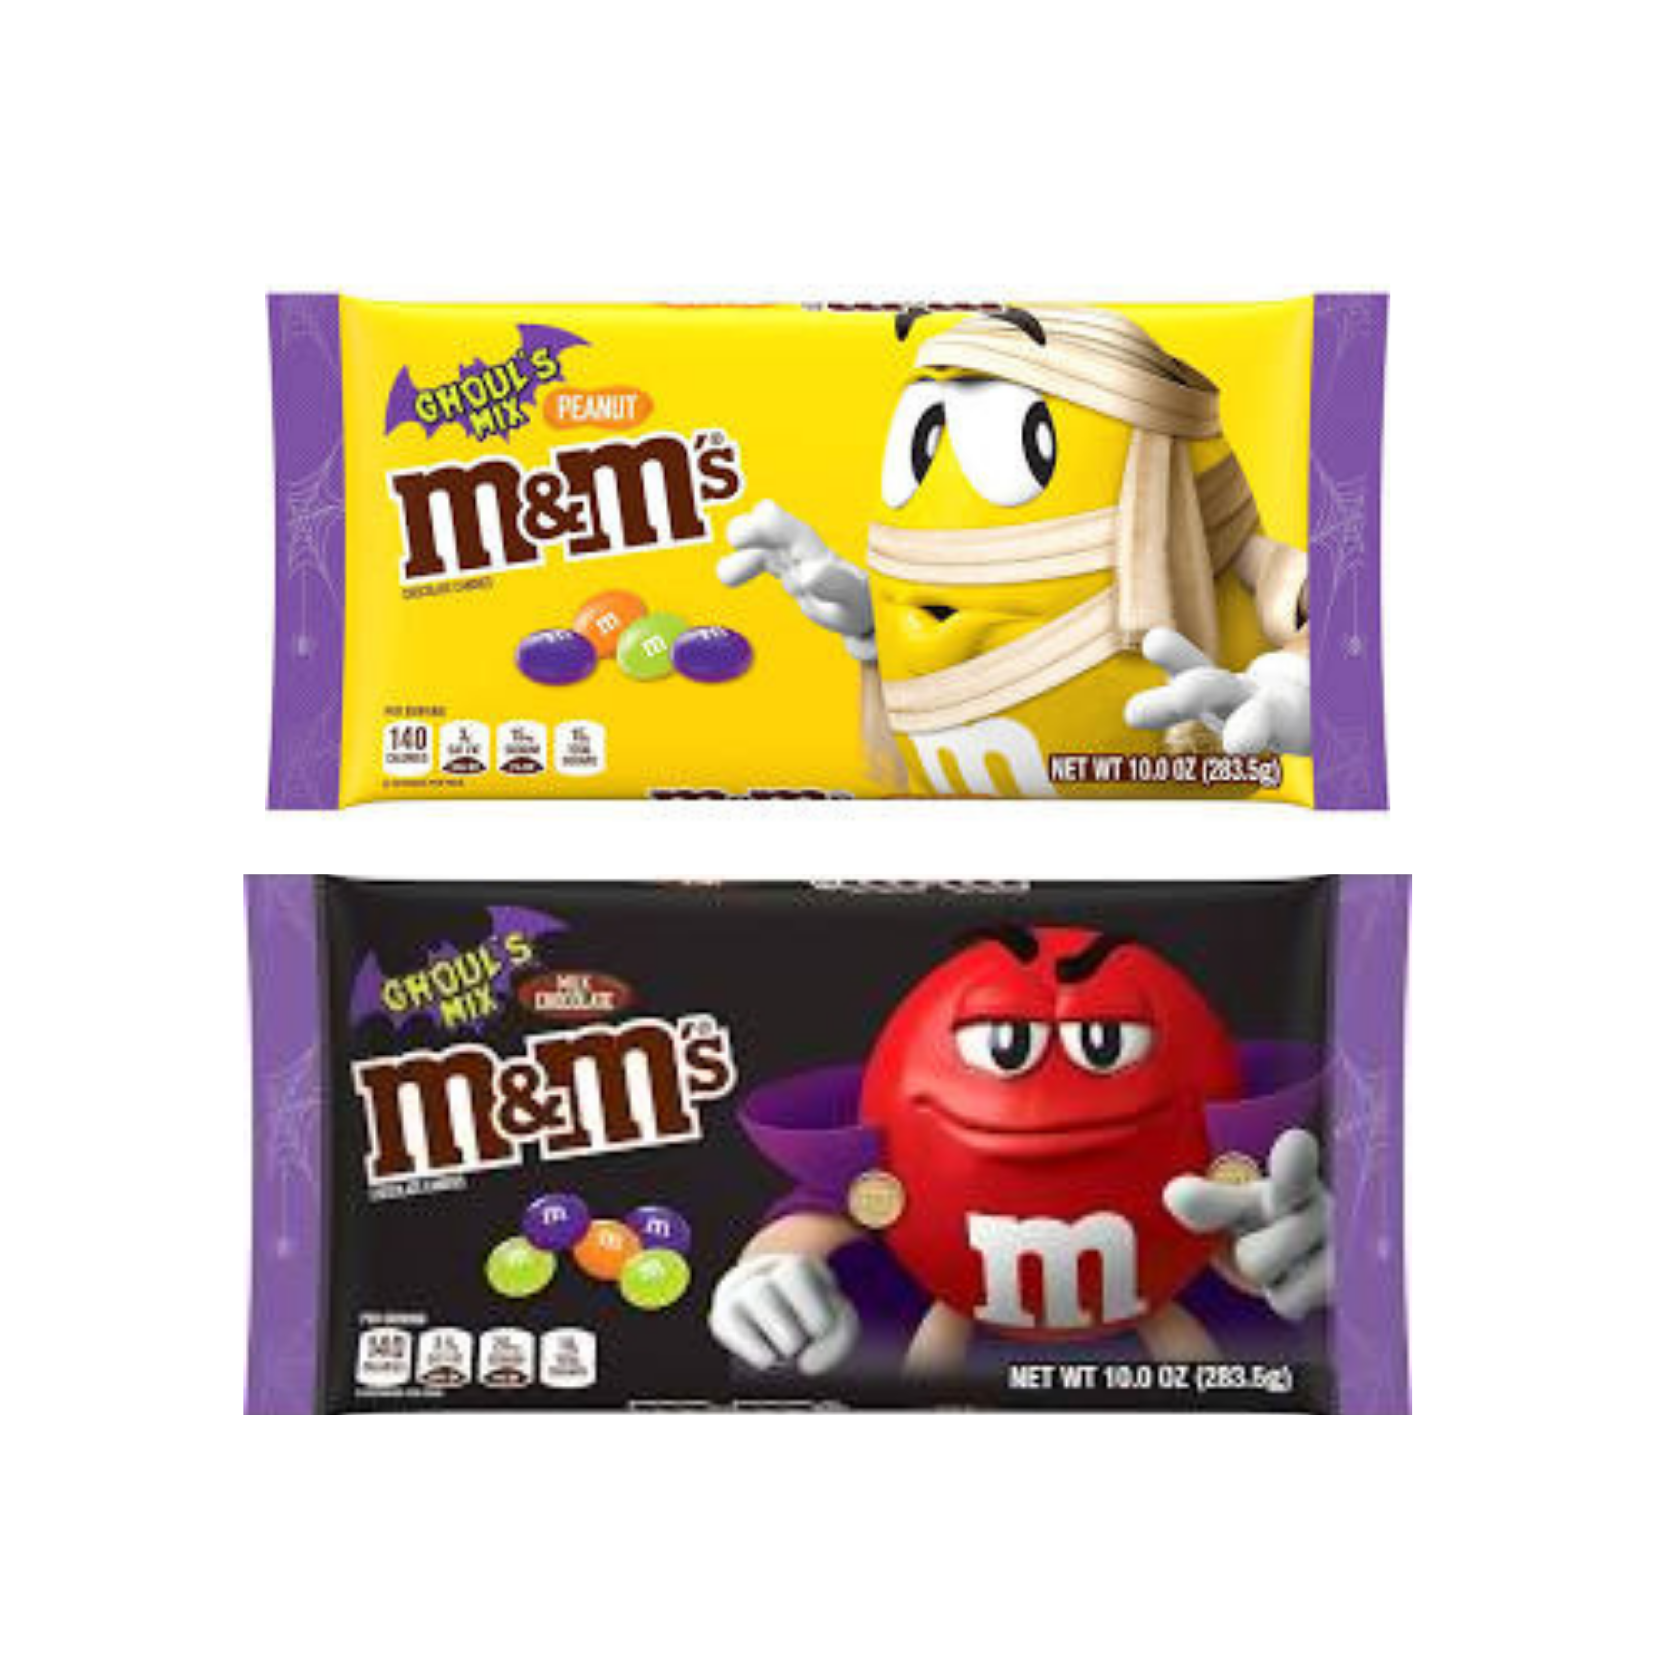  M&M'S Ghoul's Mix Milk Chocolate Halloween Candy Bag